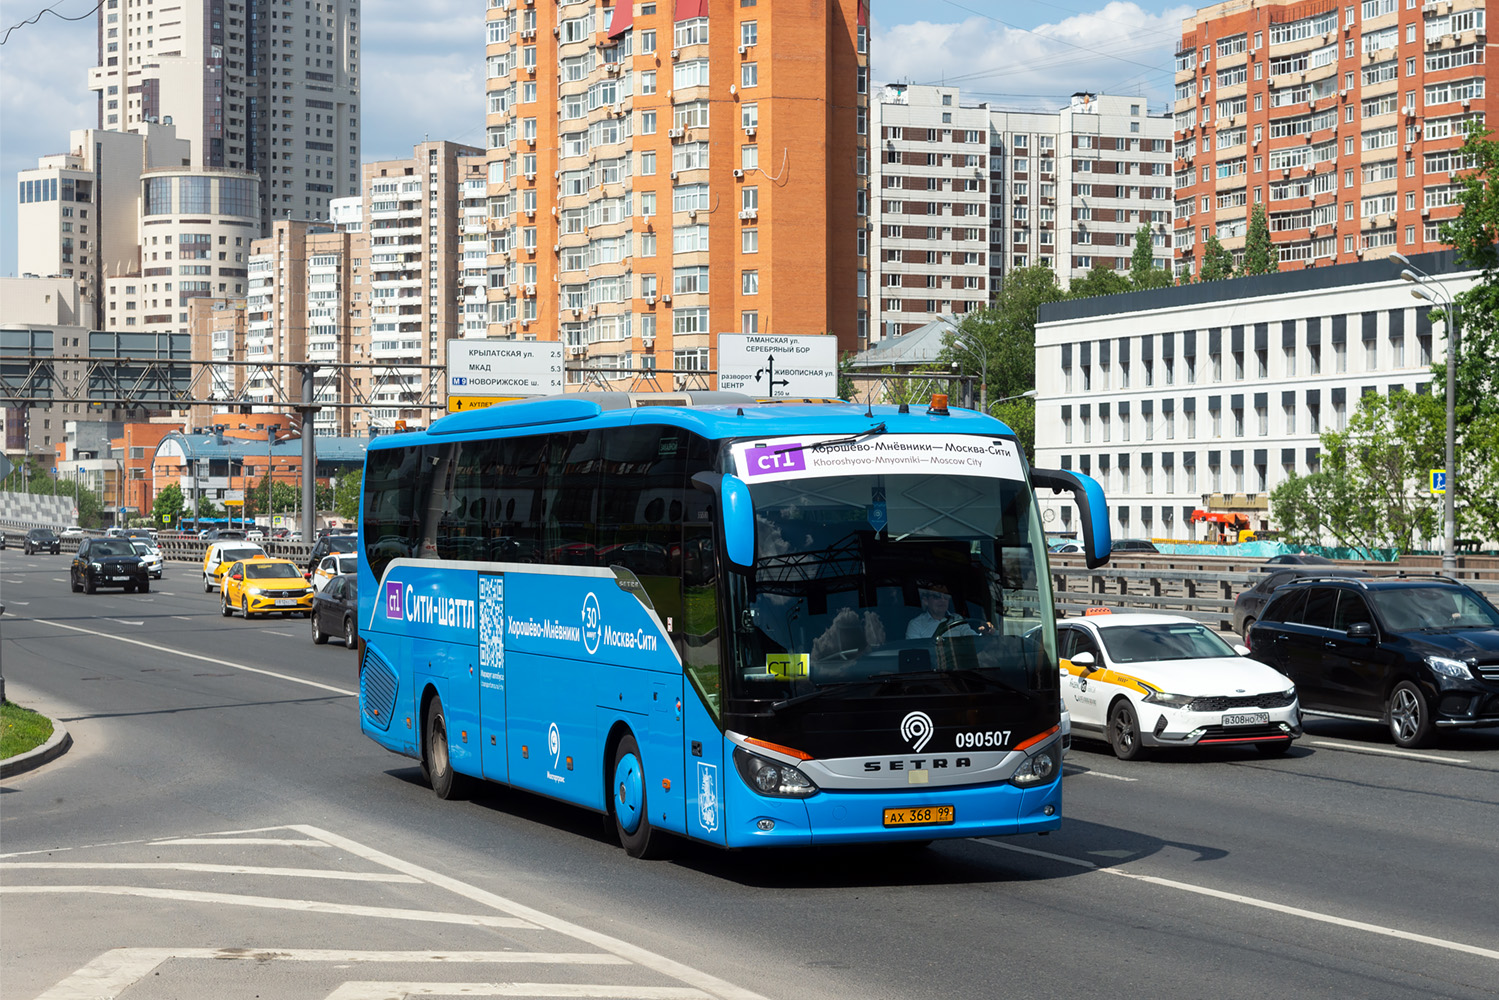 Moscow, Setra S515HD (Russland) # 090507